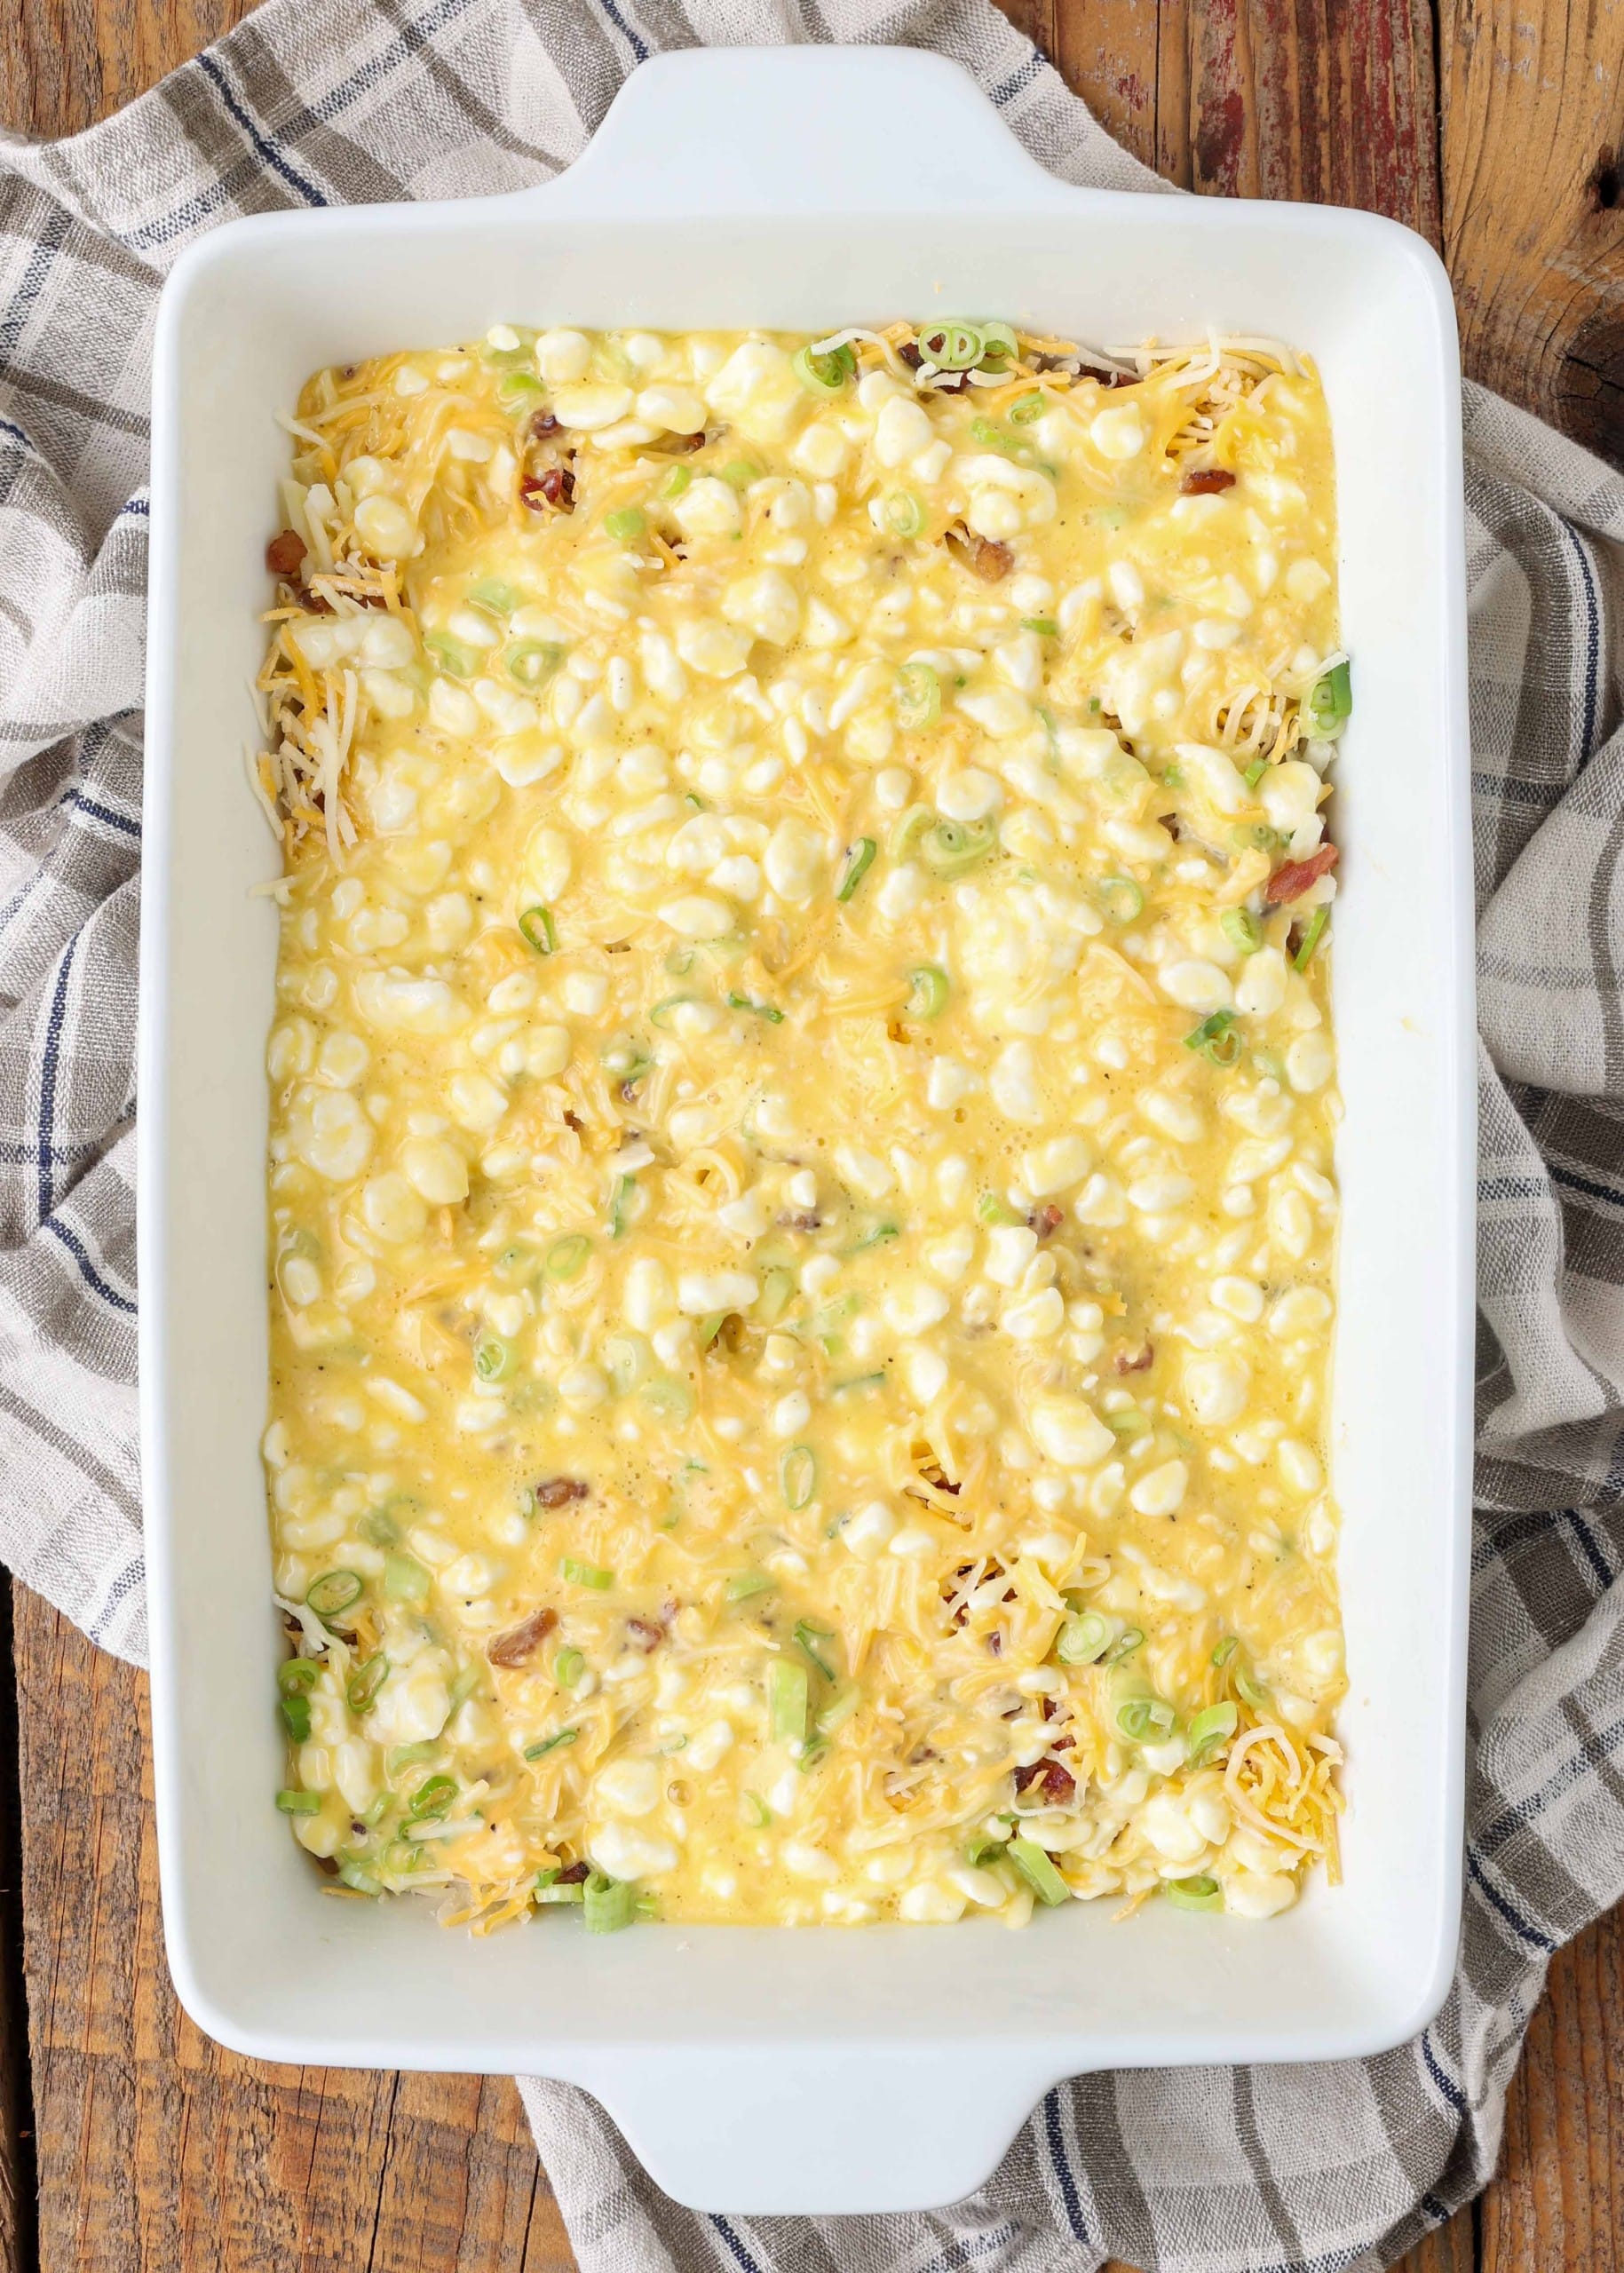 https://chocolatewithgrace.com/wp-content/uploads/2023/08/Amish-Breakfast-Casserole-CWG-4-1-of-1-scaled.jpg